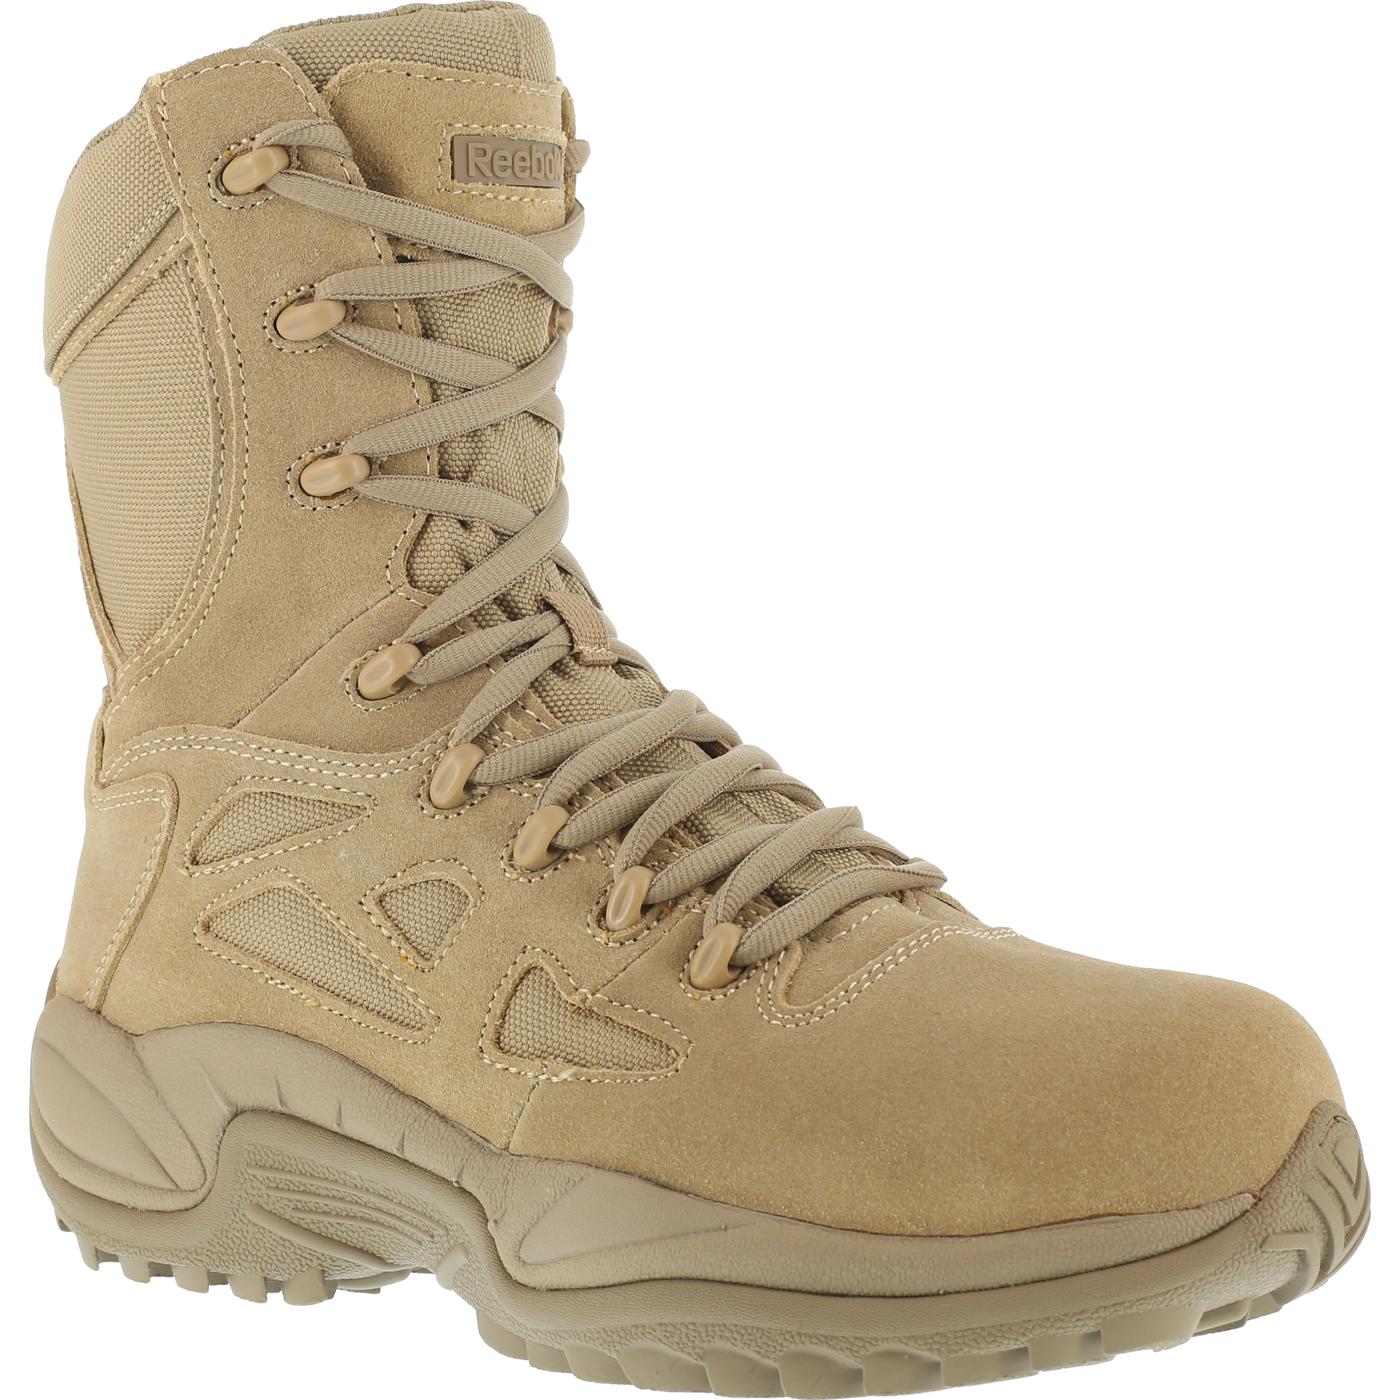 Reebok Stealth Composite Toe Duty Boot with Side Zipper Size 11(W) - image 1 of 5